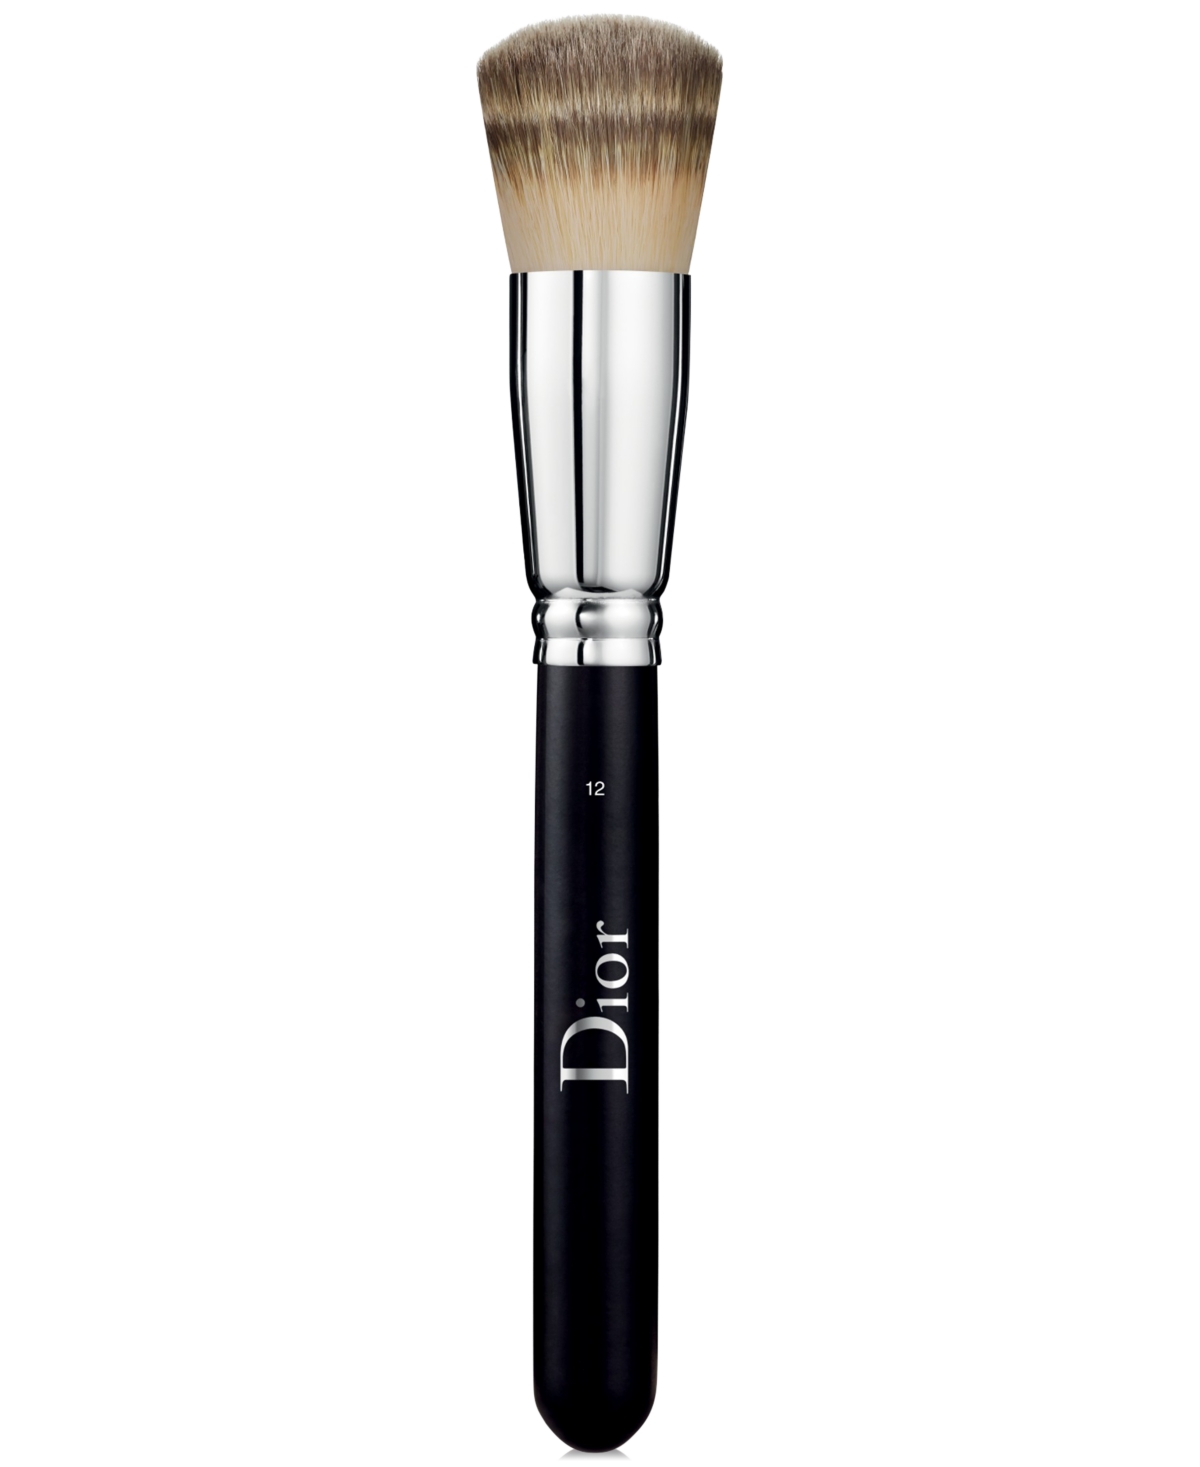 Dior Backstage Full Coverage Fluid Foundation Brush N°12 In No Color